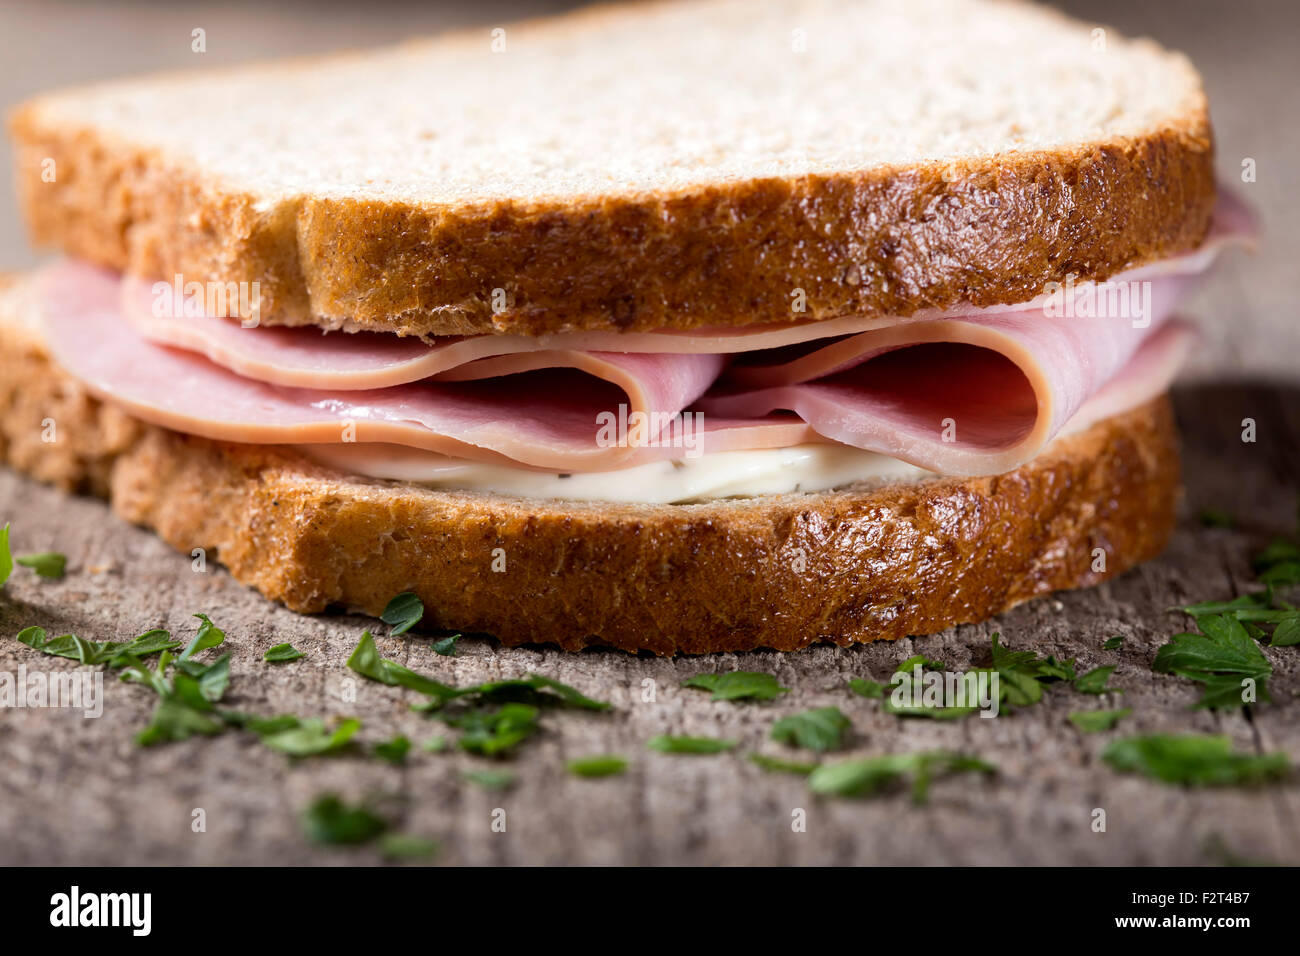 Salami and cream cheese sandwich over wooden background Stock Photo